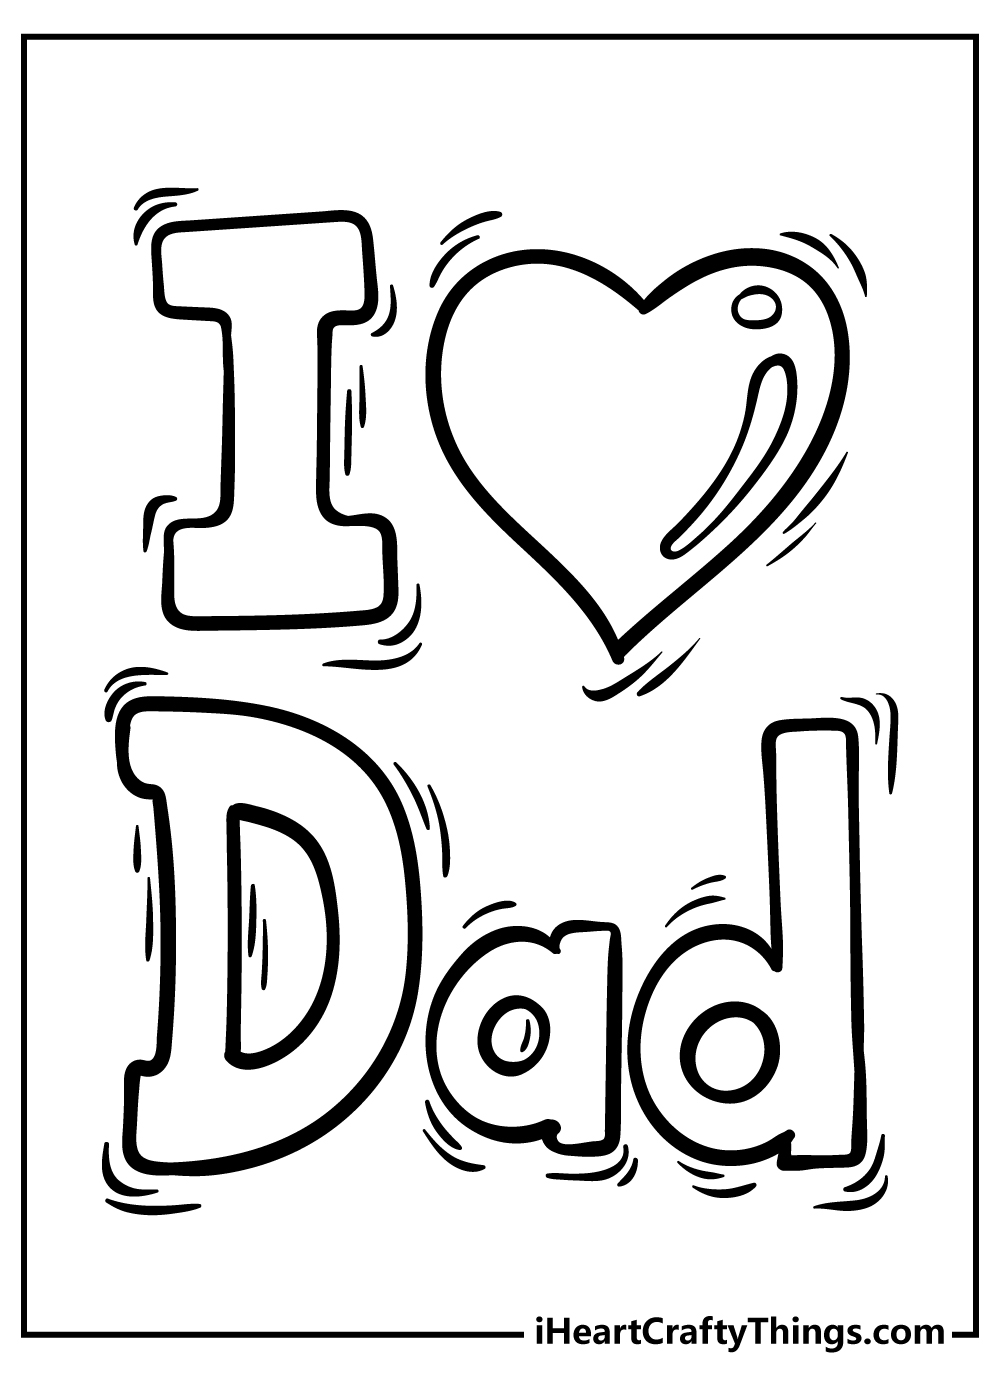 Fathers day coloring pages free printables